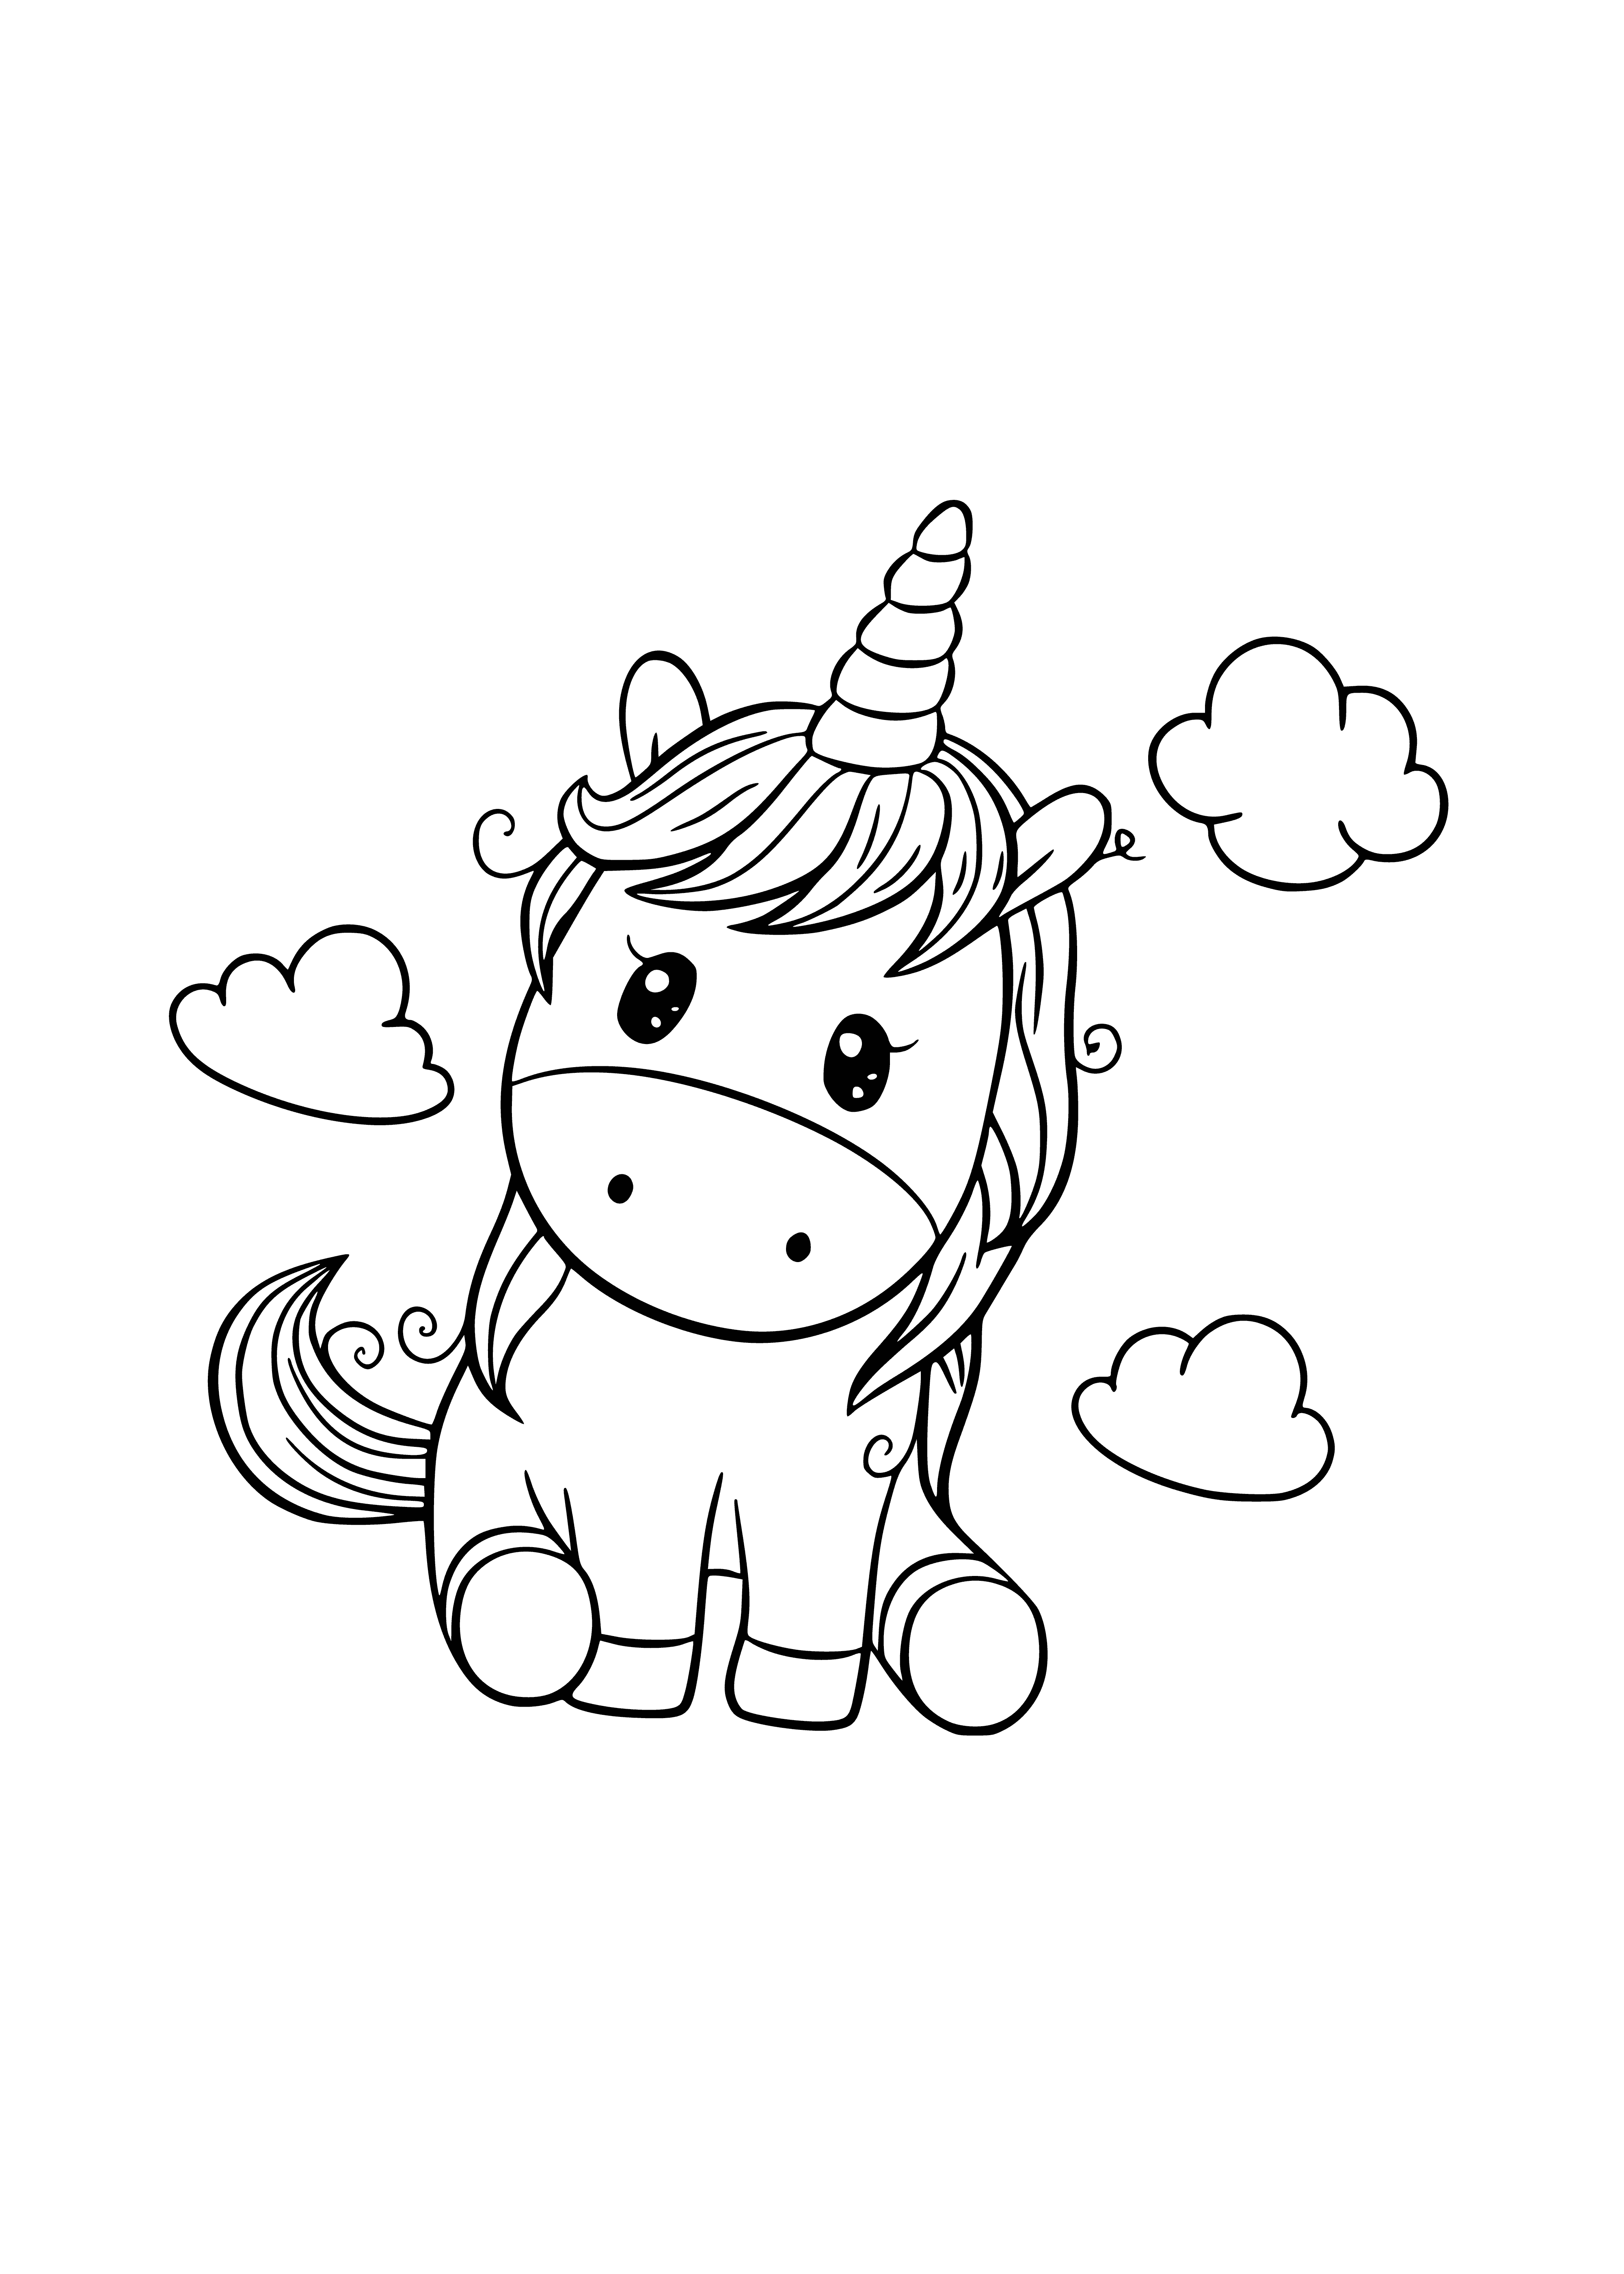 coloring page: A unicorn soars through the sky surrounded by fluffy clouds in a beautiful blue sky.